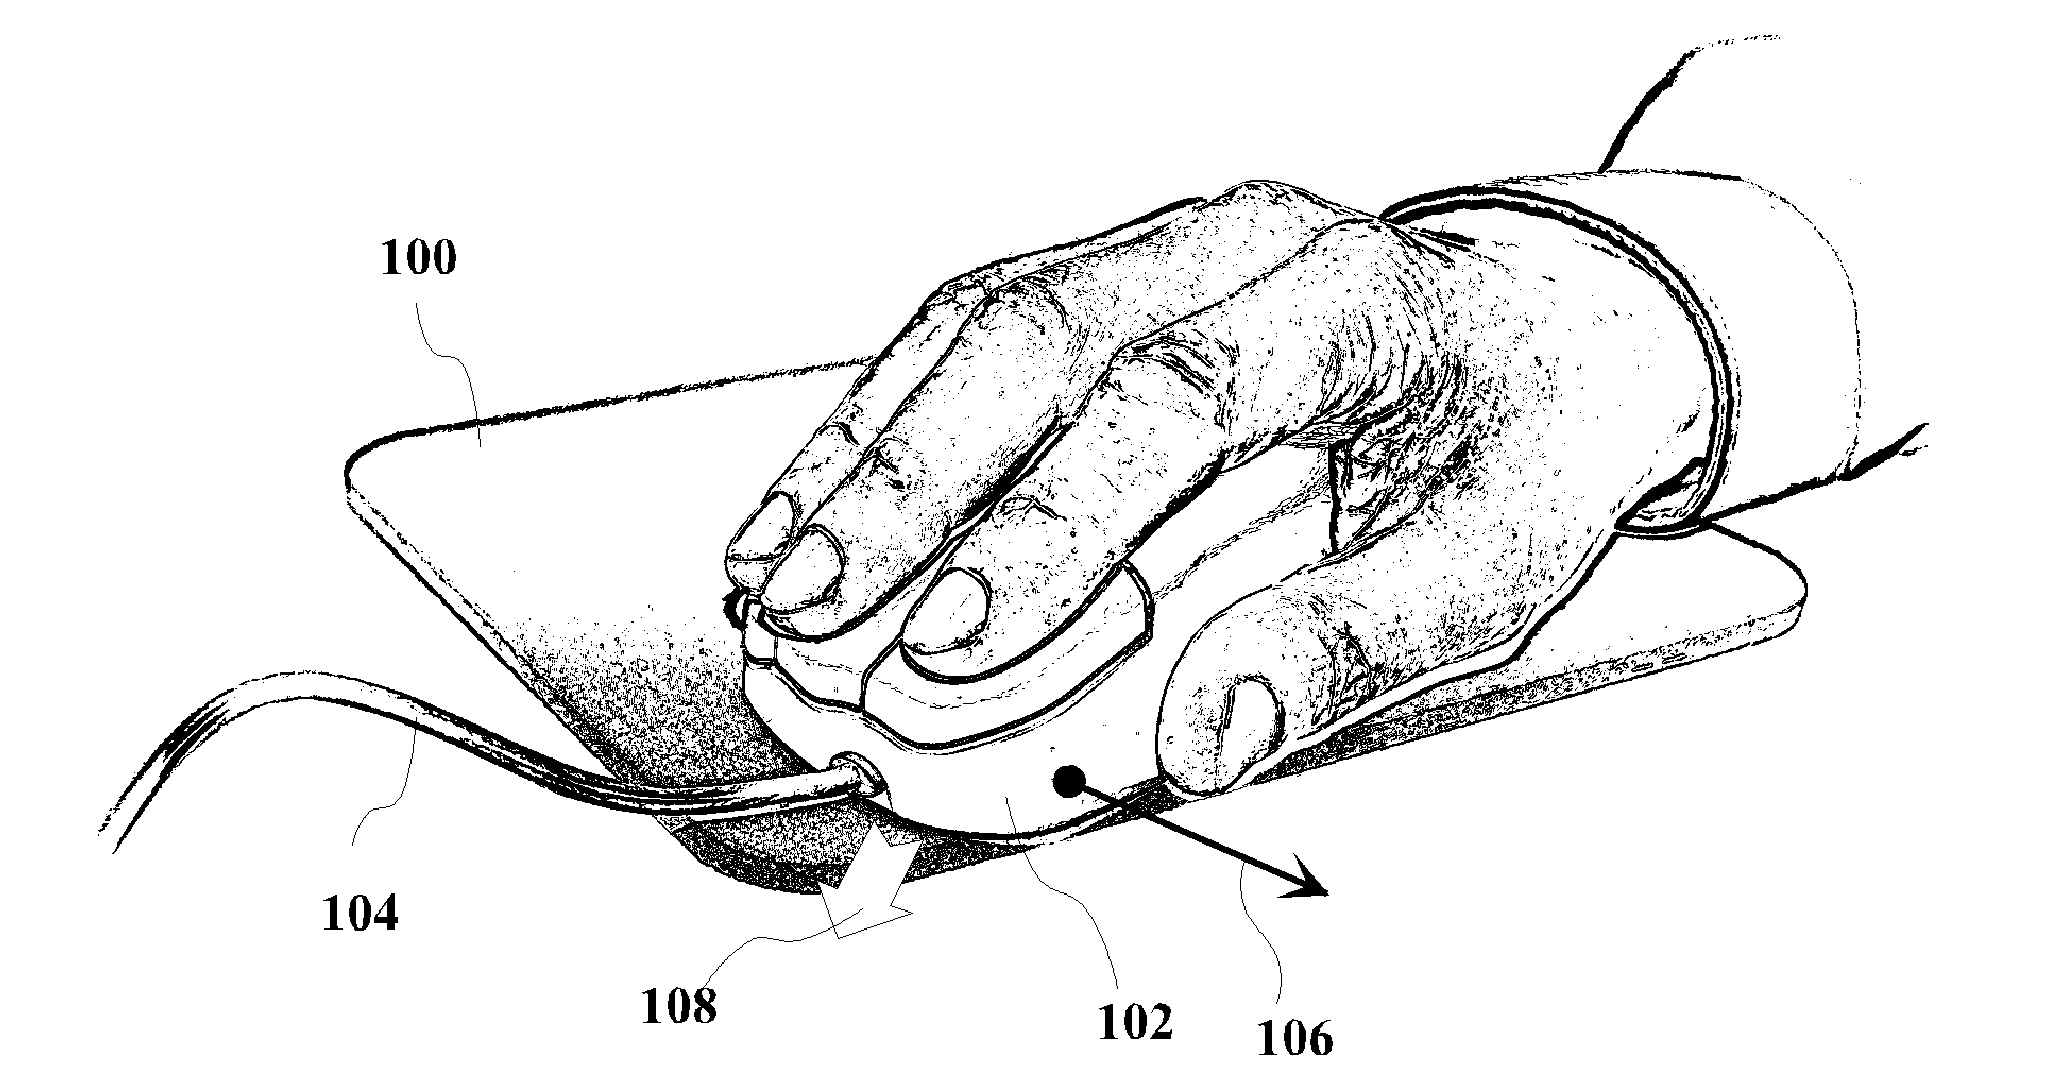 Self-propelled haptic mouse system